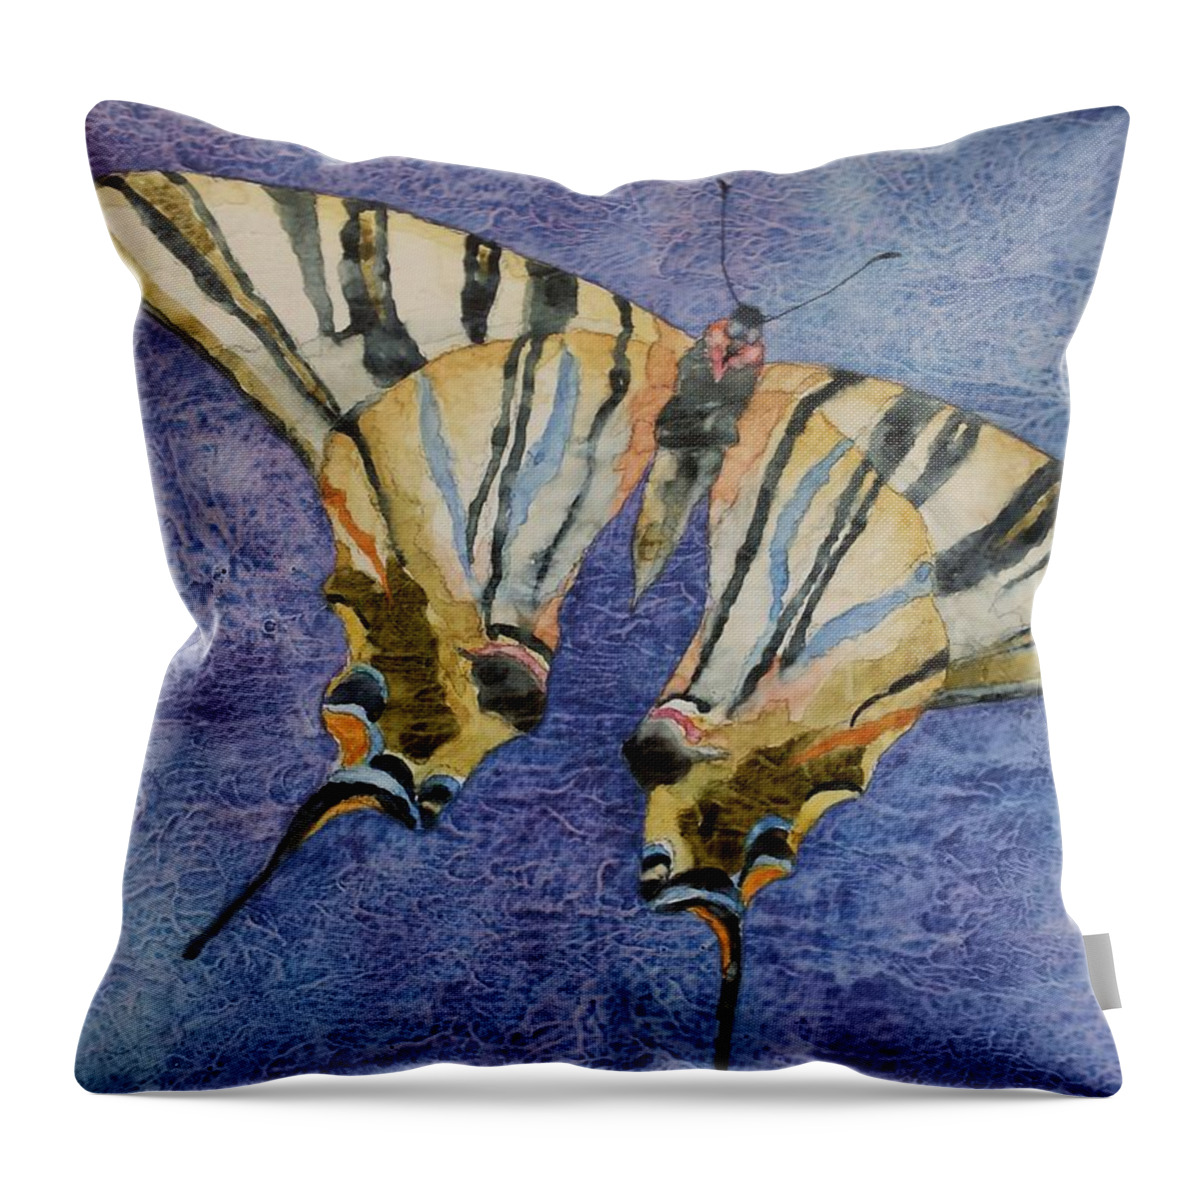 Watercolor Throw Pillow featuring the painting Fly Away Home by Casey Rasmussen White